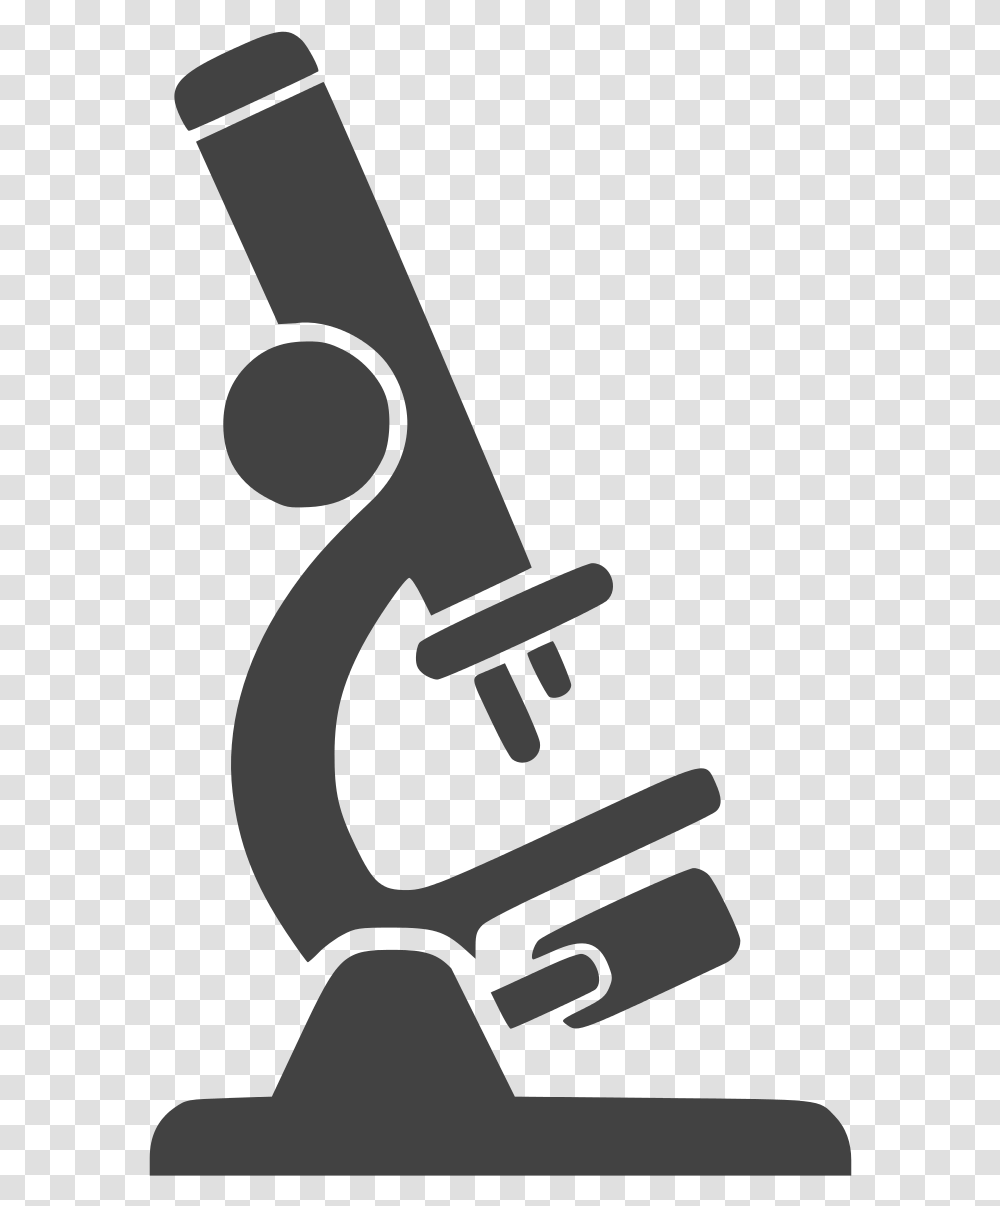 Best Free Microscope Image Microscope Clipart, Alphabet, Ampersand Transparent Png